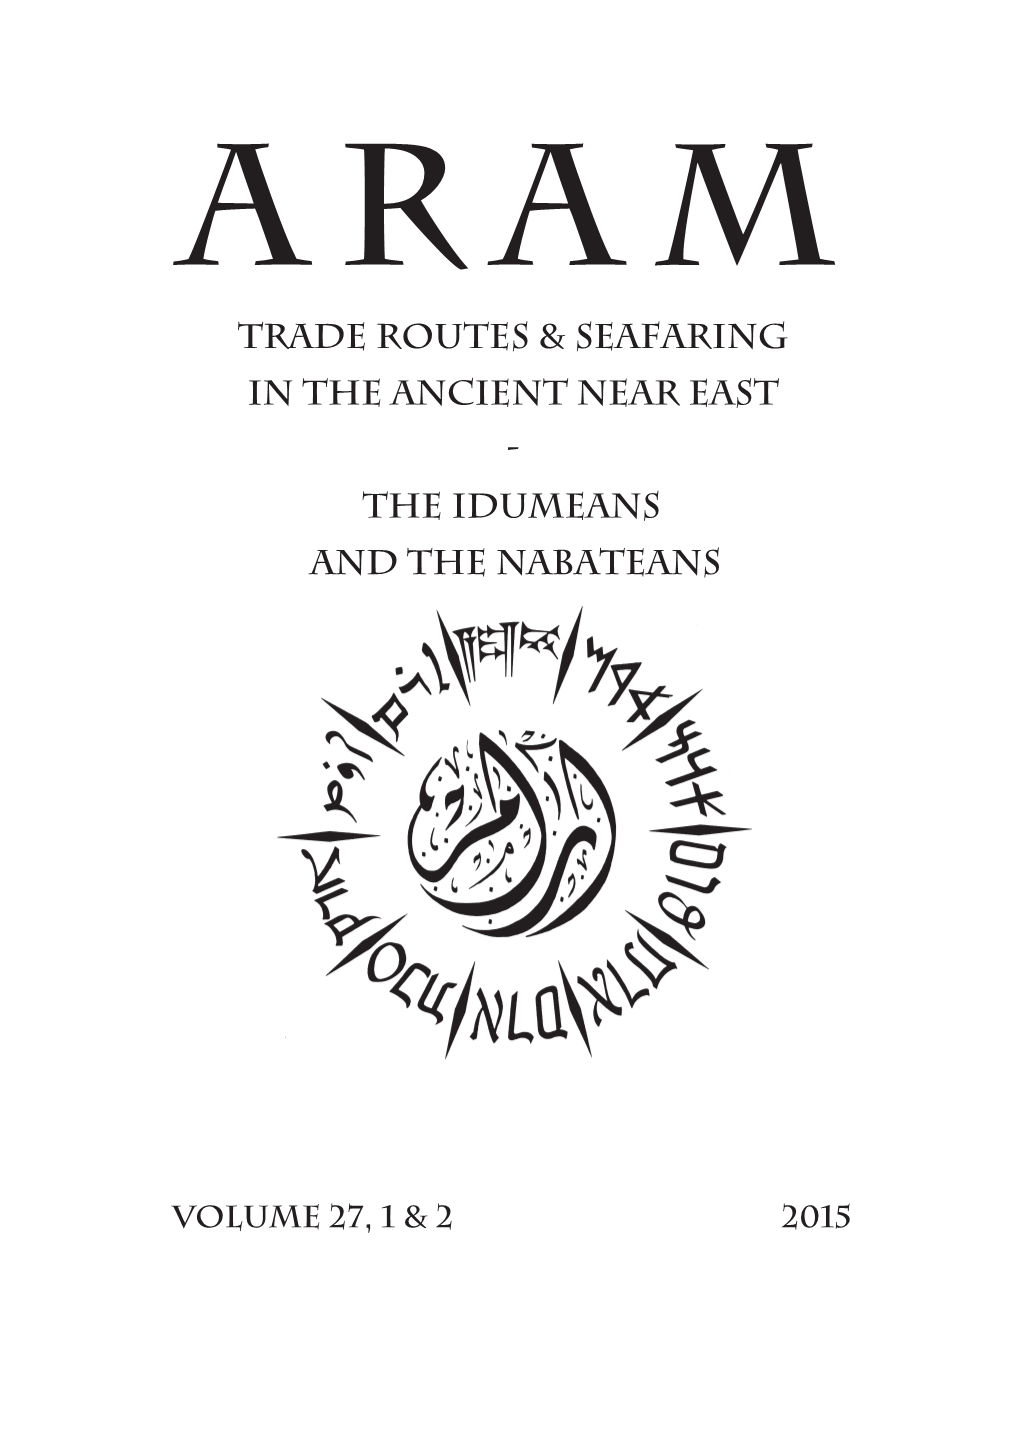 Trade Routes & Seafaring in the Ancient Near East